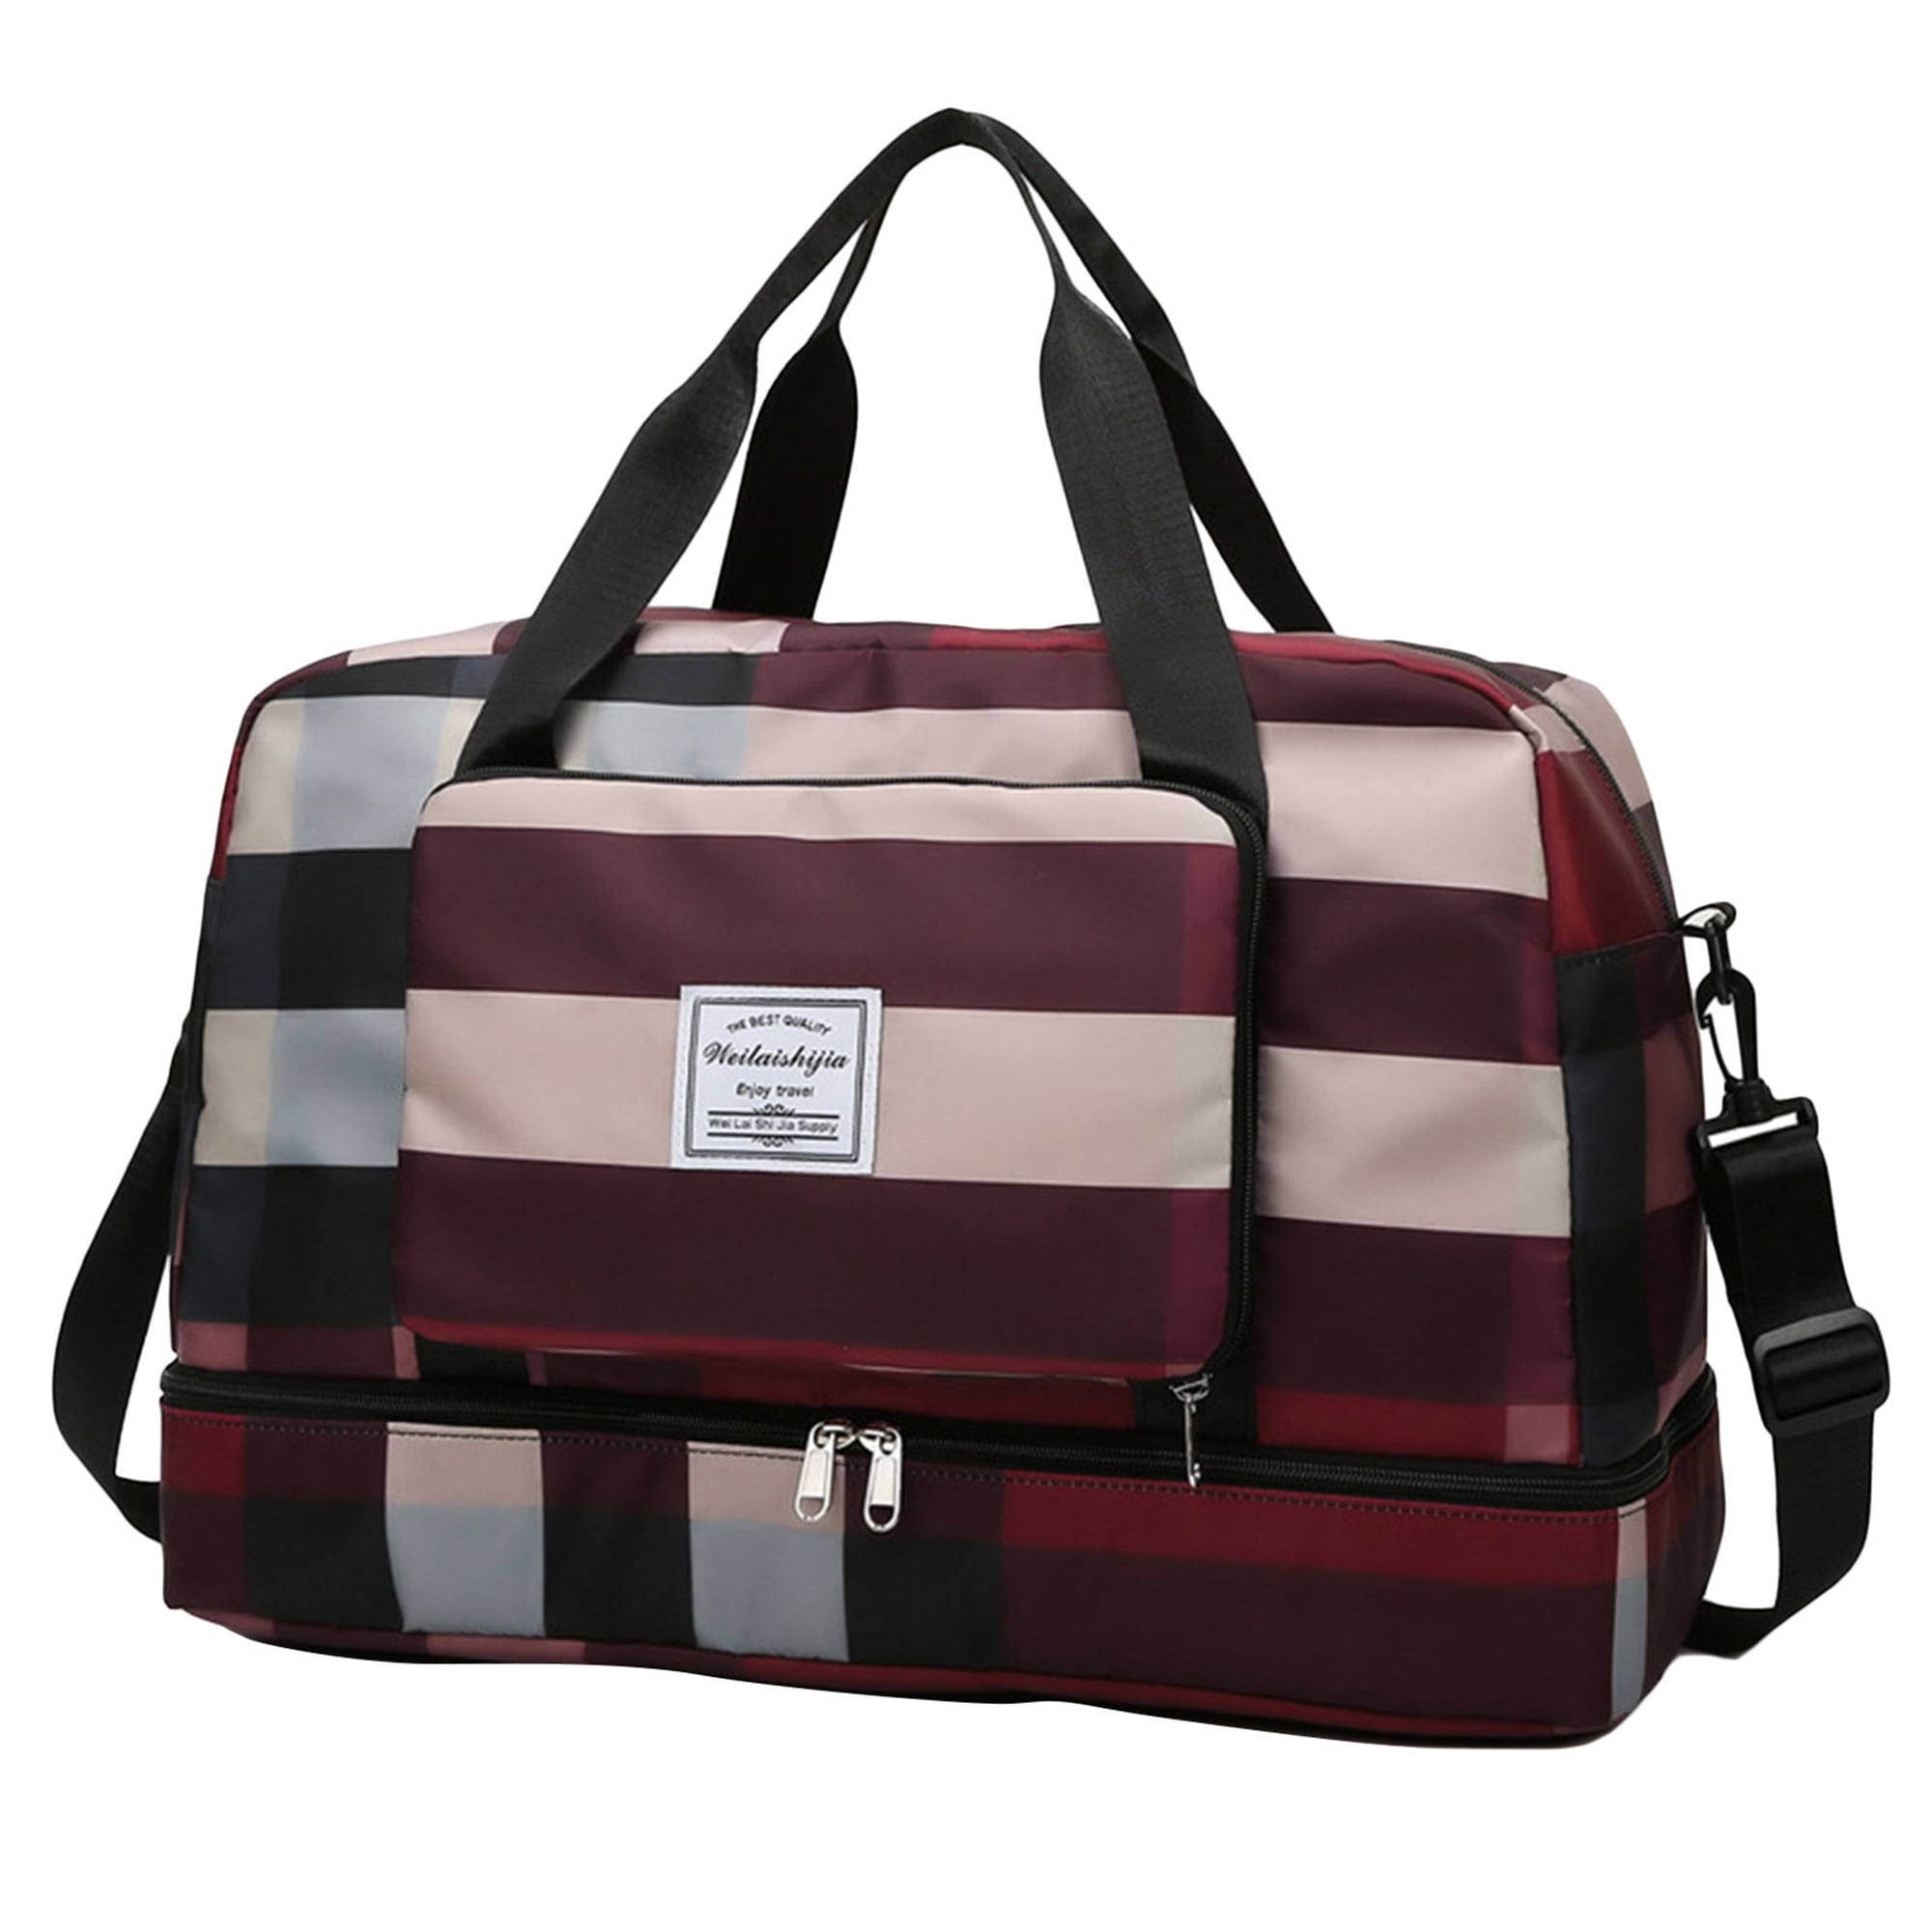 J.Lindeberg Golf Duffle Bag Unisex Sports Handbag For Men, With Independent  Golf Shoe Compartment Ideal For Laundry, Travel And More 230901 From Bao06,  $20.47 | DHgate.Com